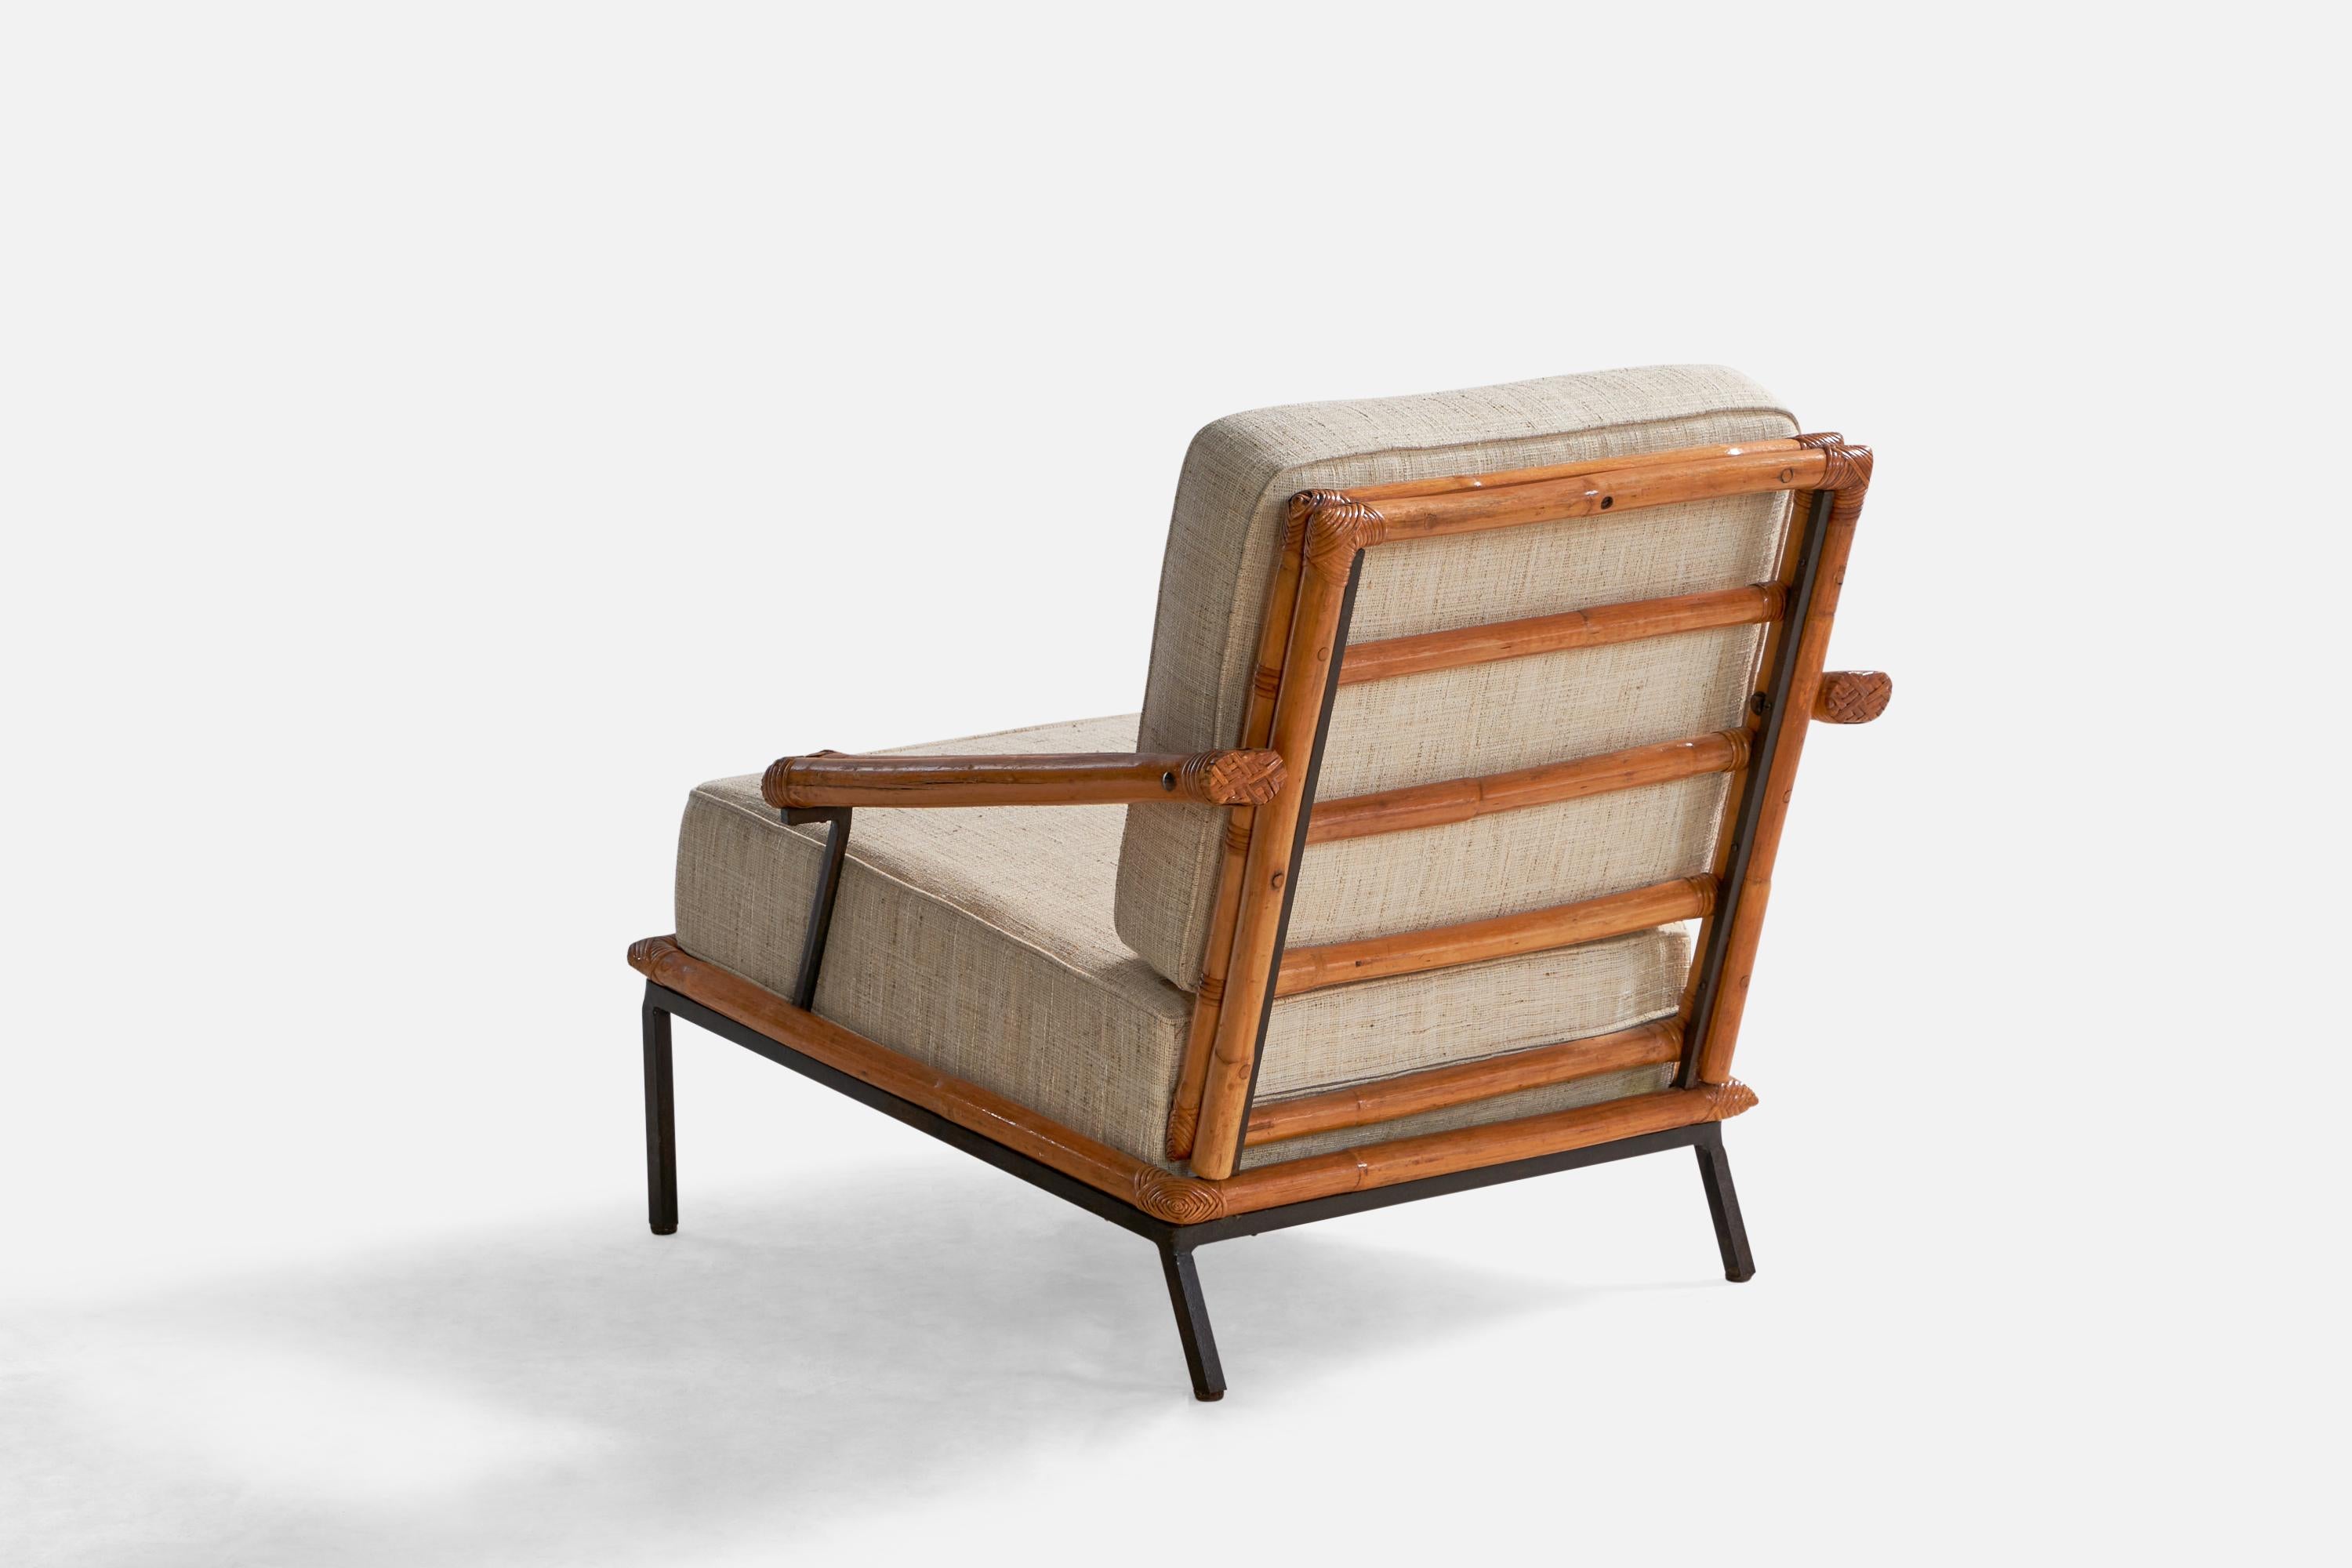 Mid-20th Century American Designer, Lounge Chair w Ottoman, Iron, Bamboo, Fabric, USA, 1950s For Sale